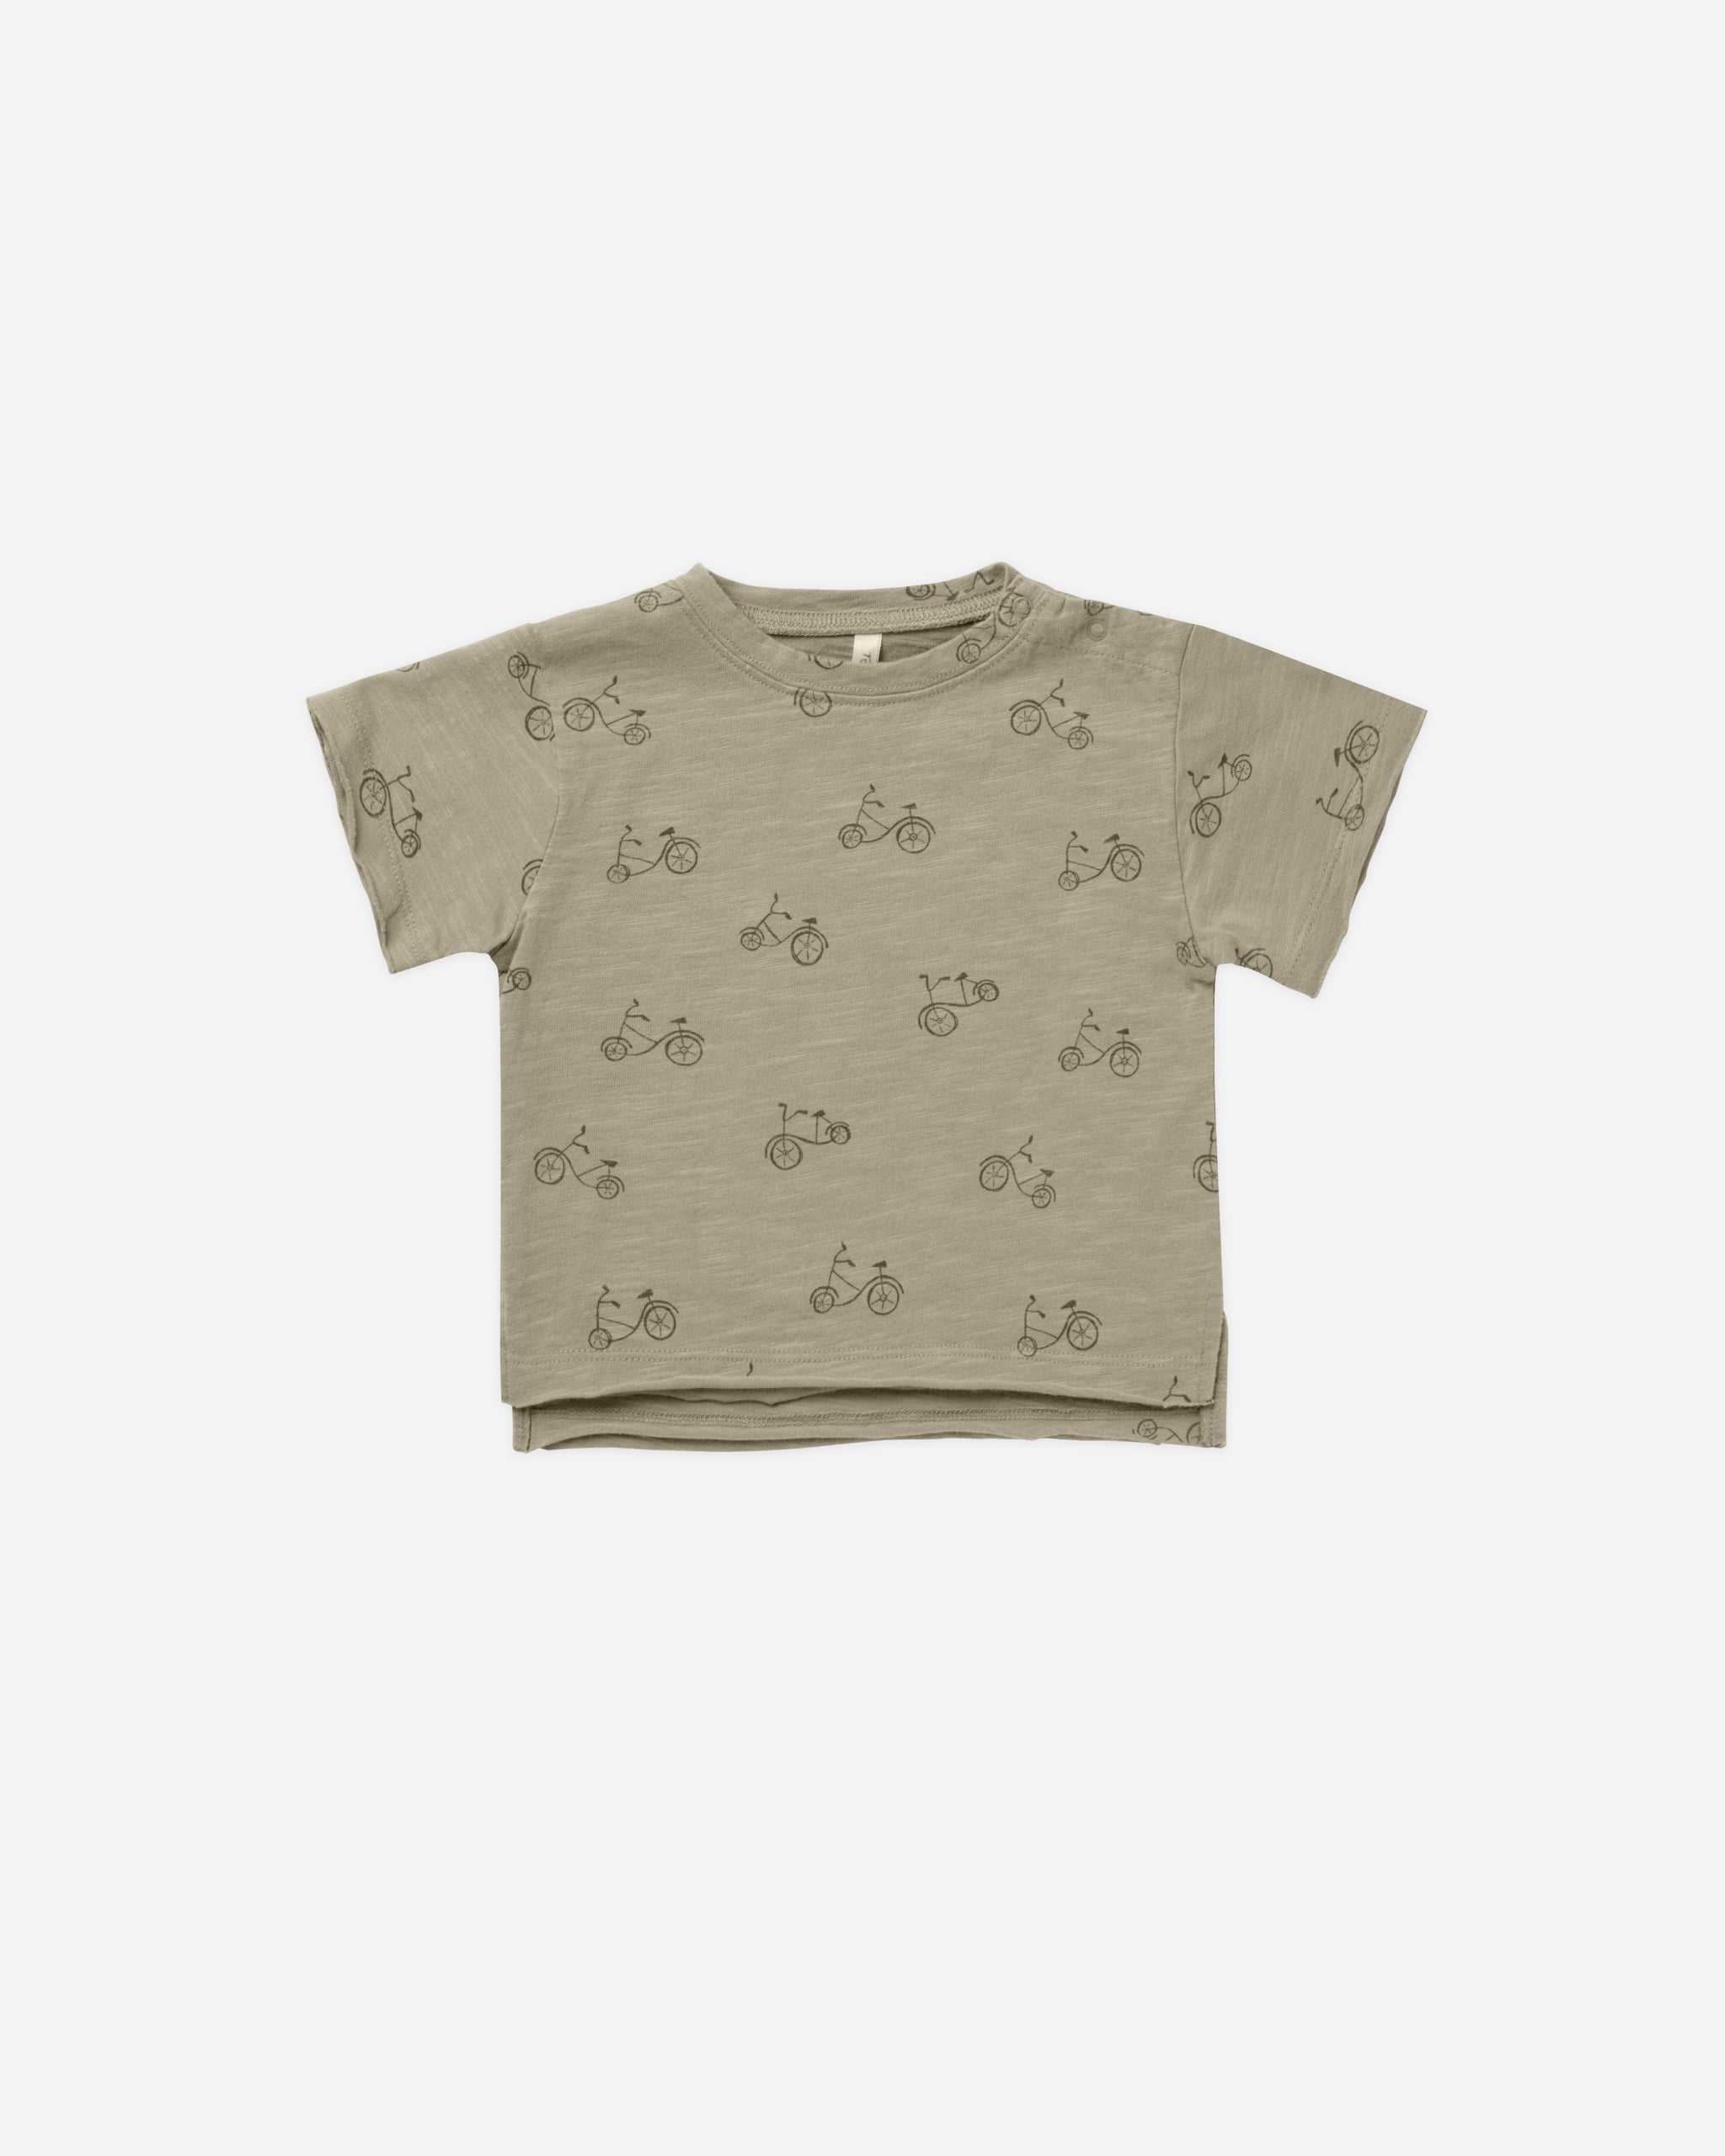 Raw Edge Tee || Bikes - Rylee + Cru | Kids Clothes | Trendy Baby Clothes | Modern Infant Outfits |